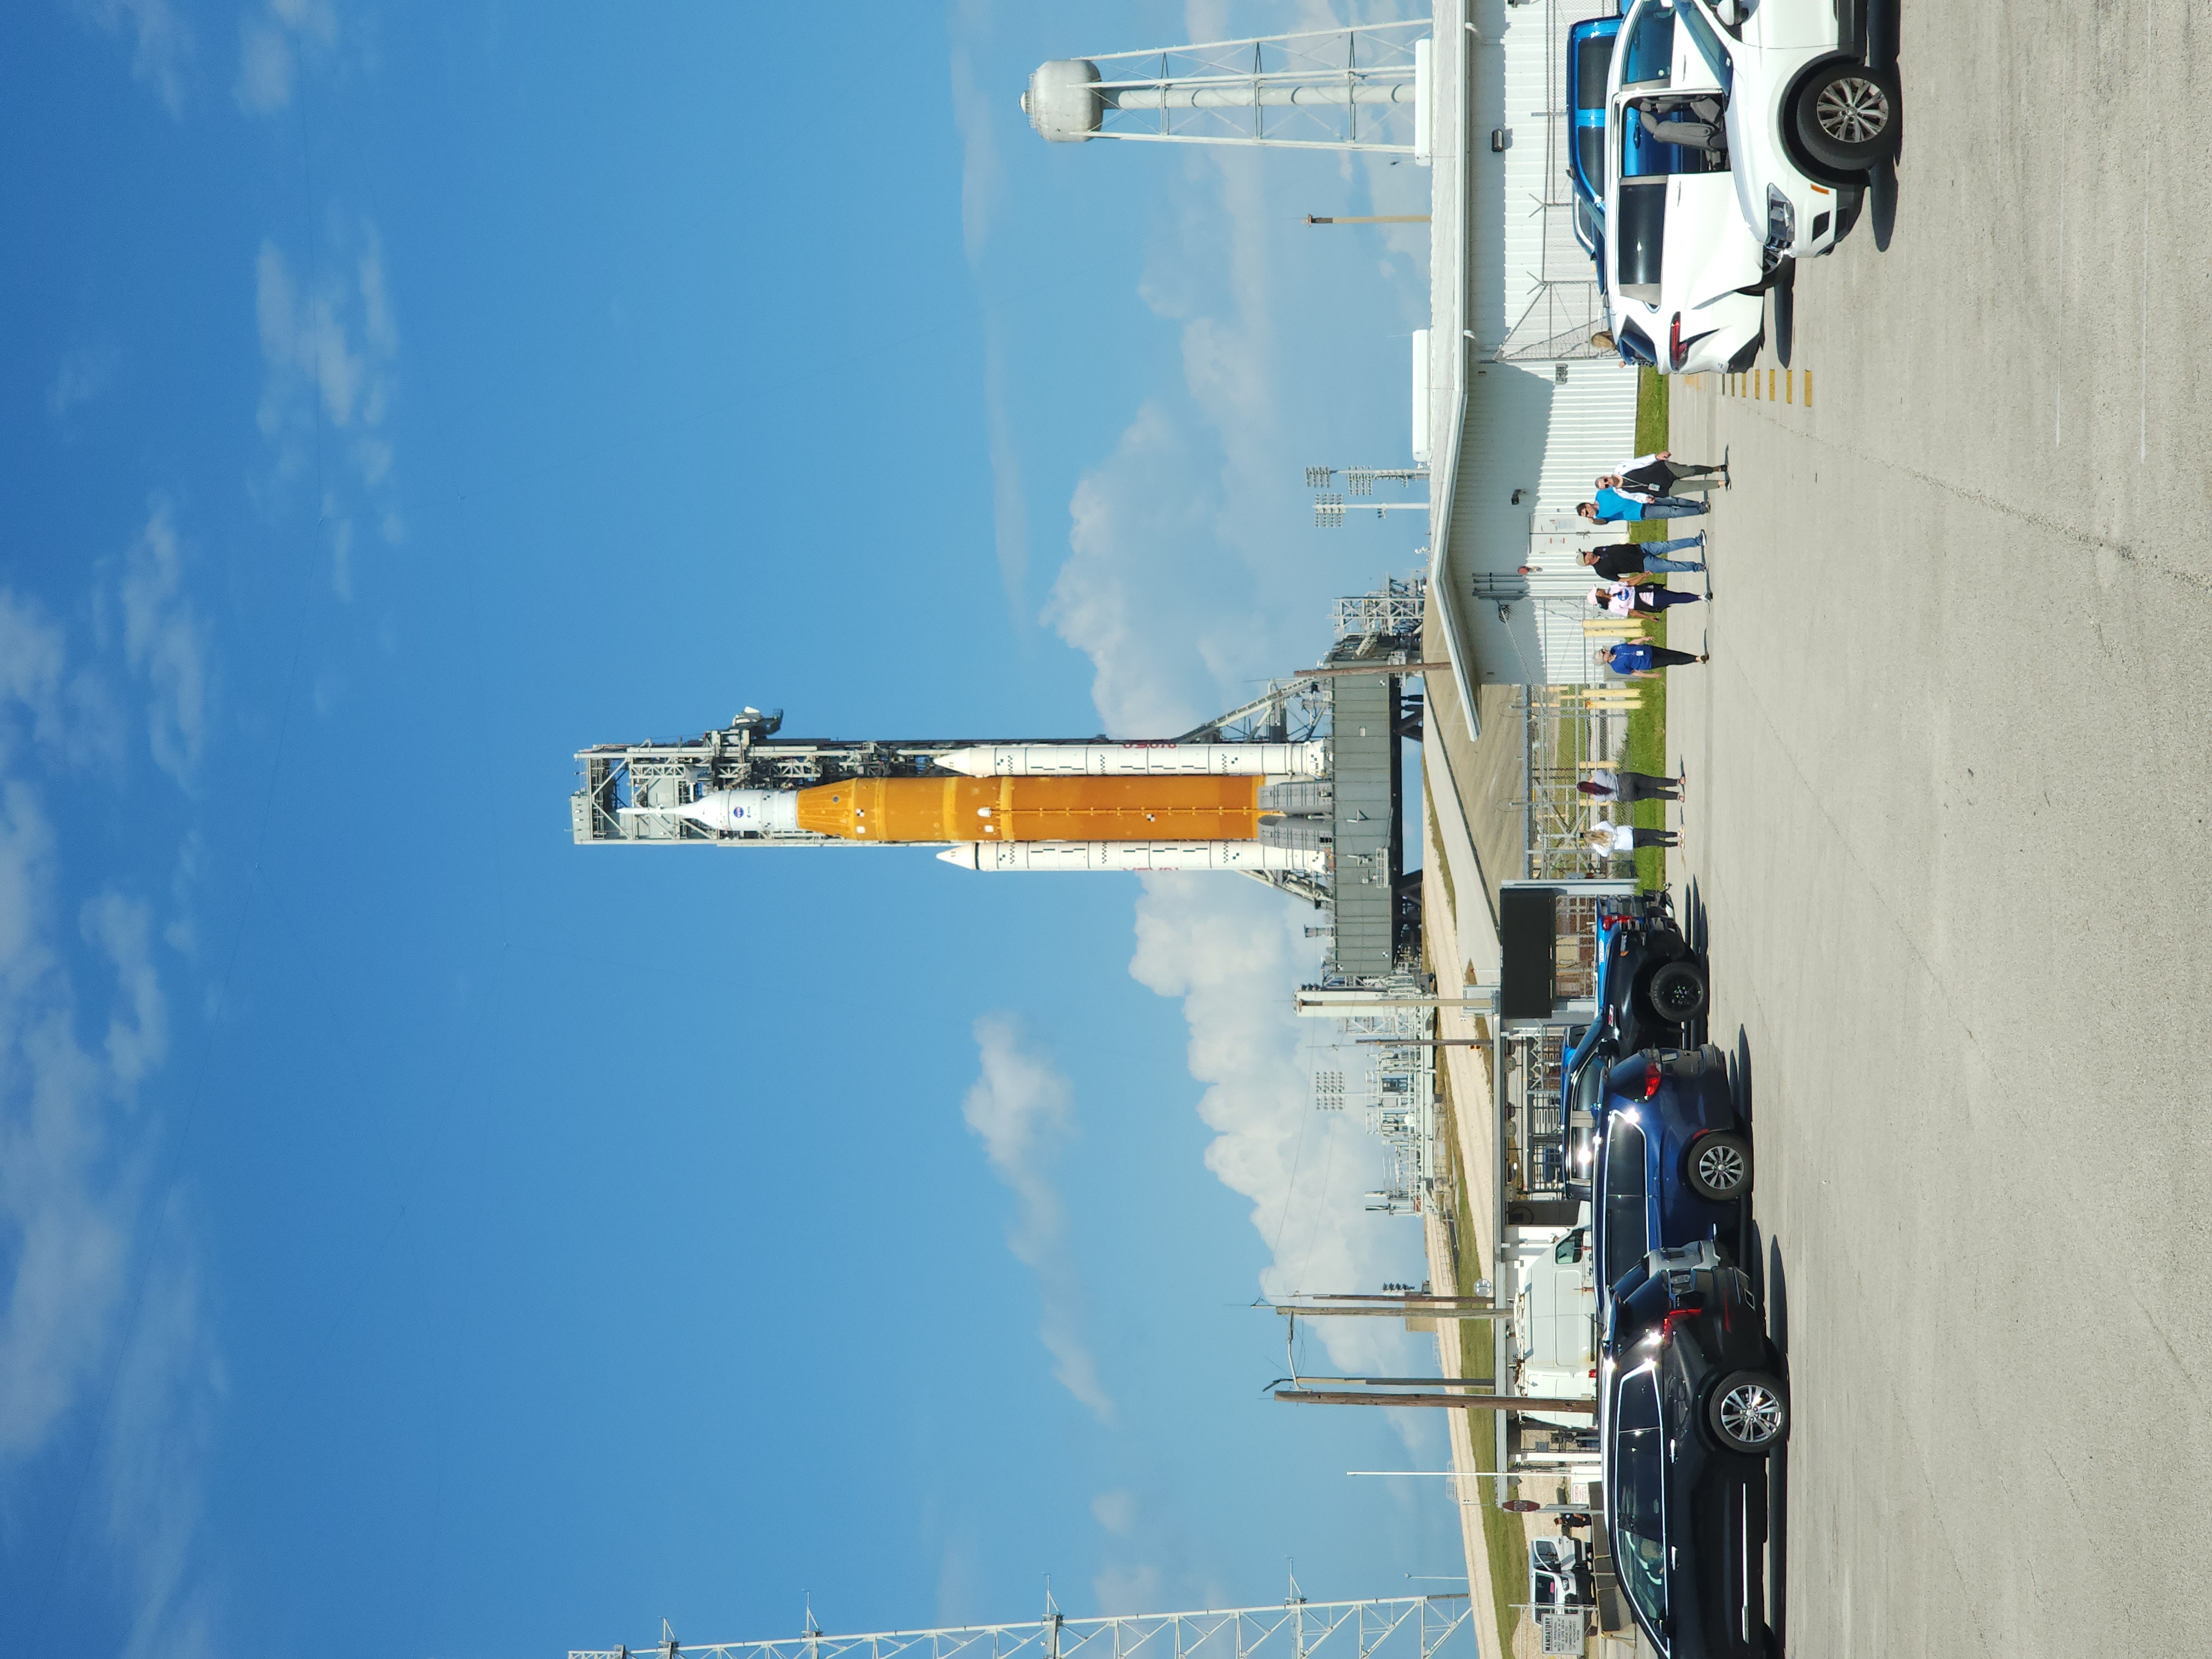 SLS rocket zoomed out view from the parking lot in front of a blue sky.